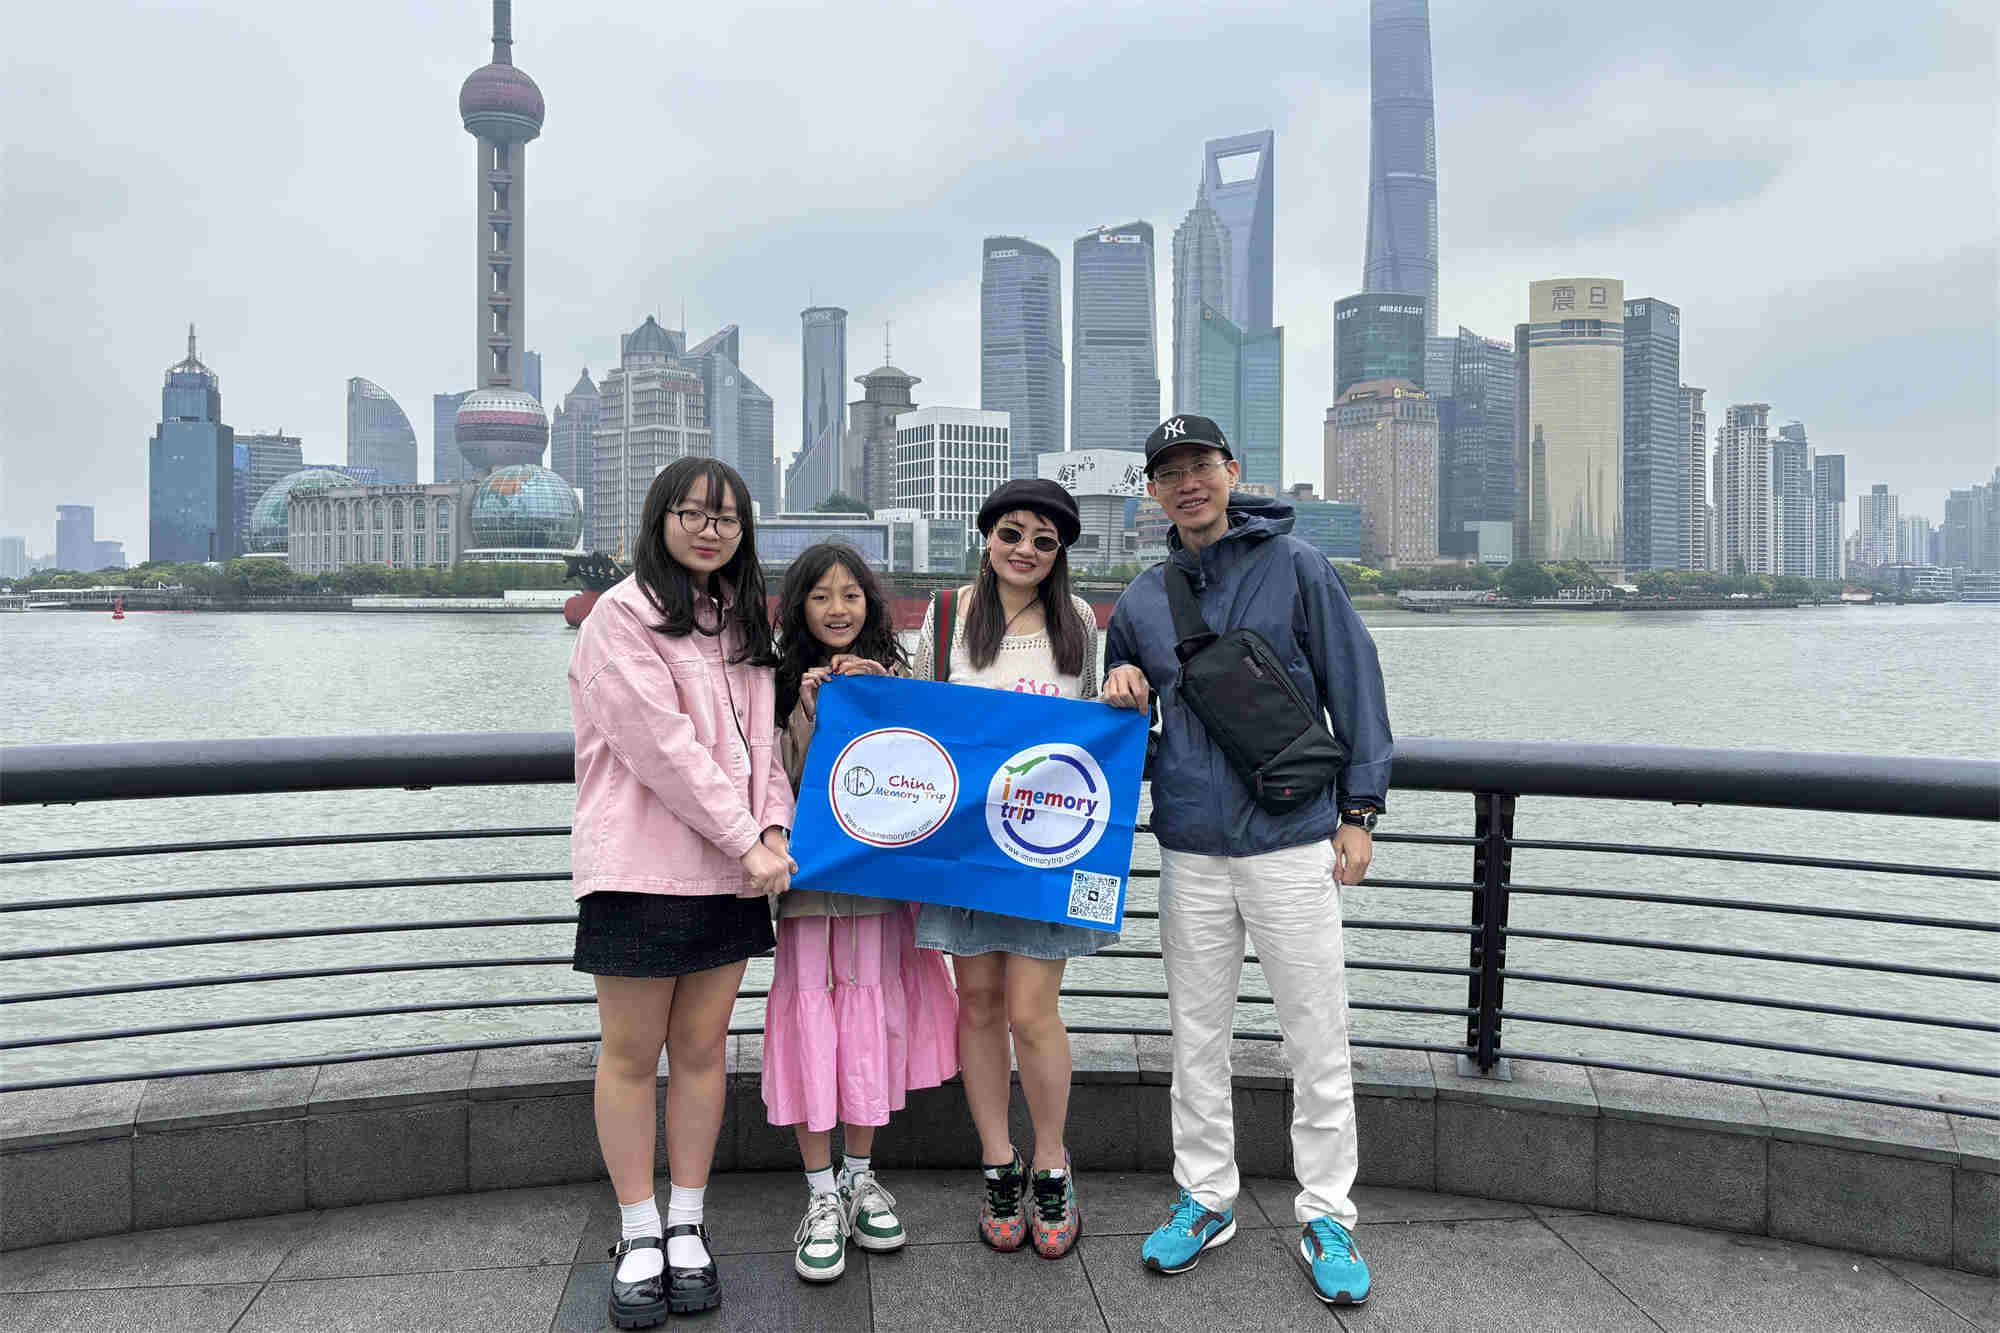 Shanghai Private Day Tour to Shanghai Tower and Oriental Pearl Tower